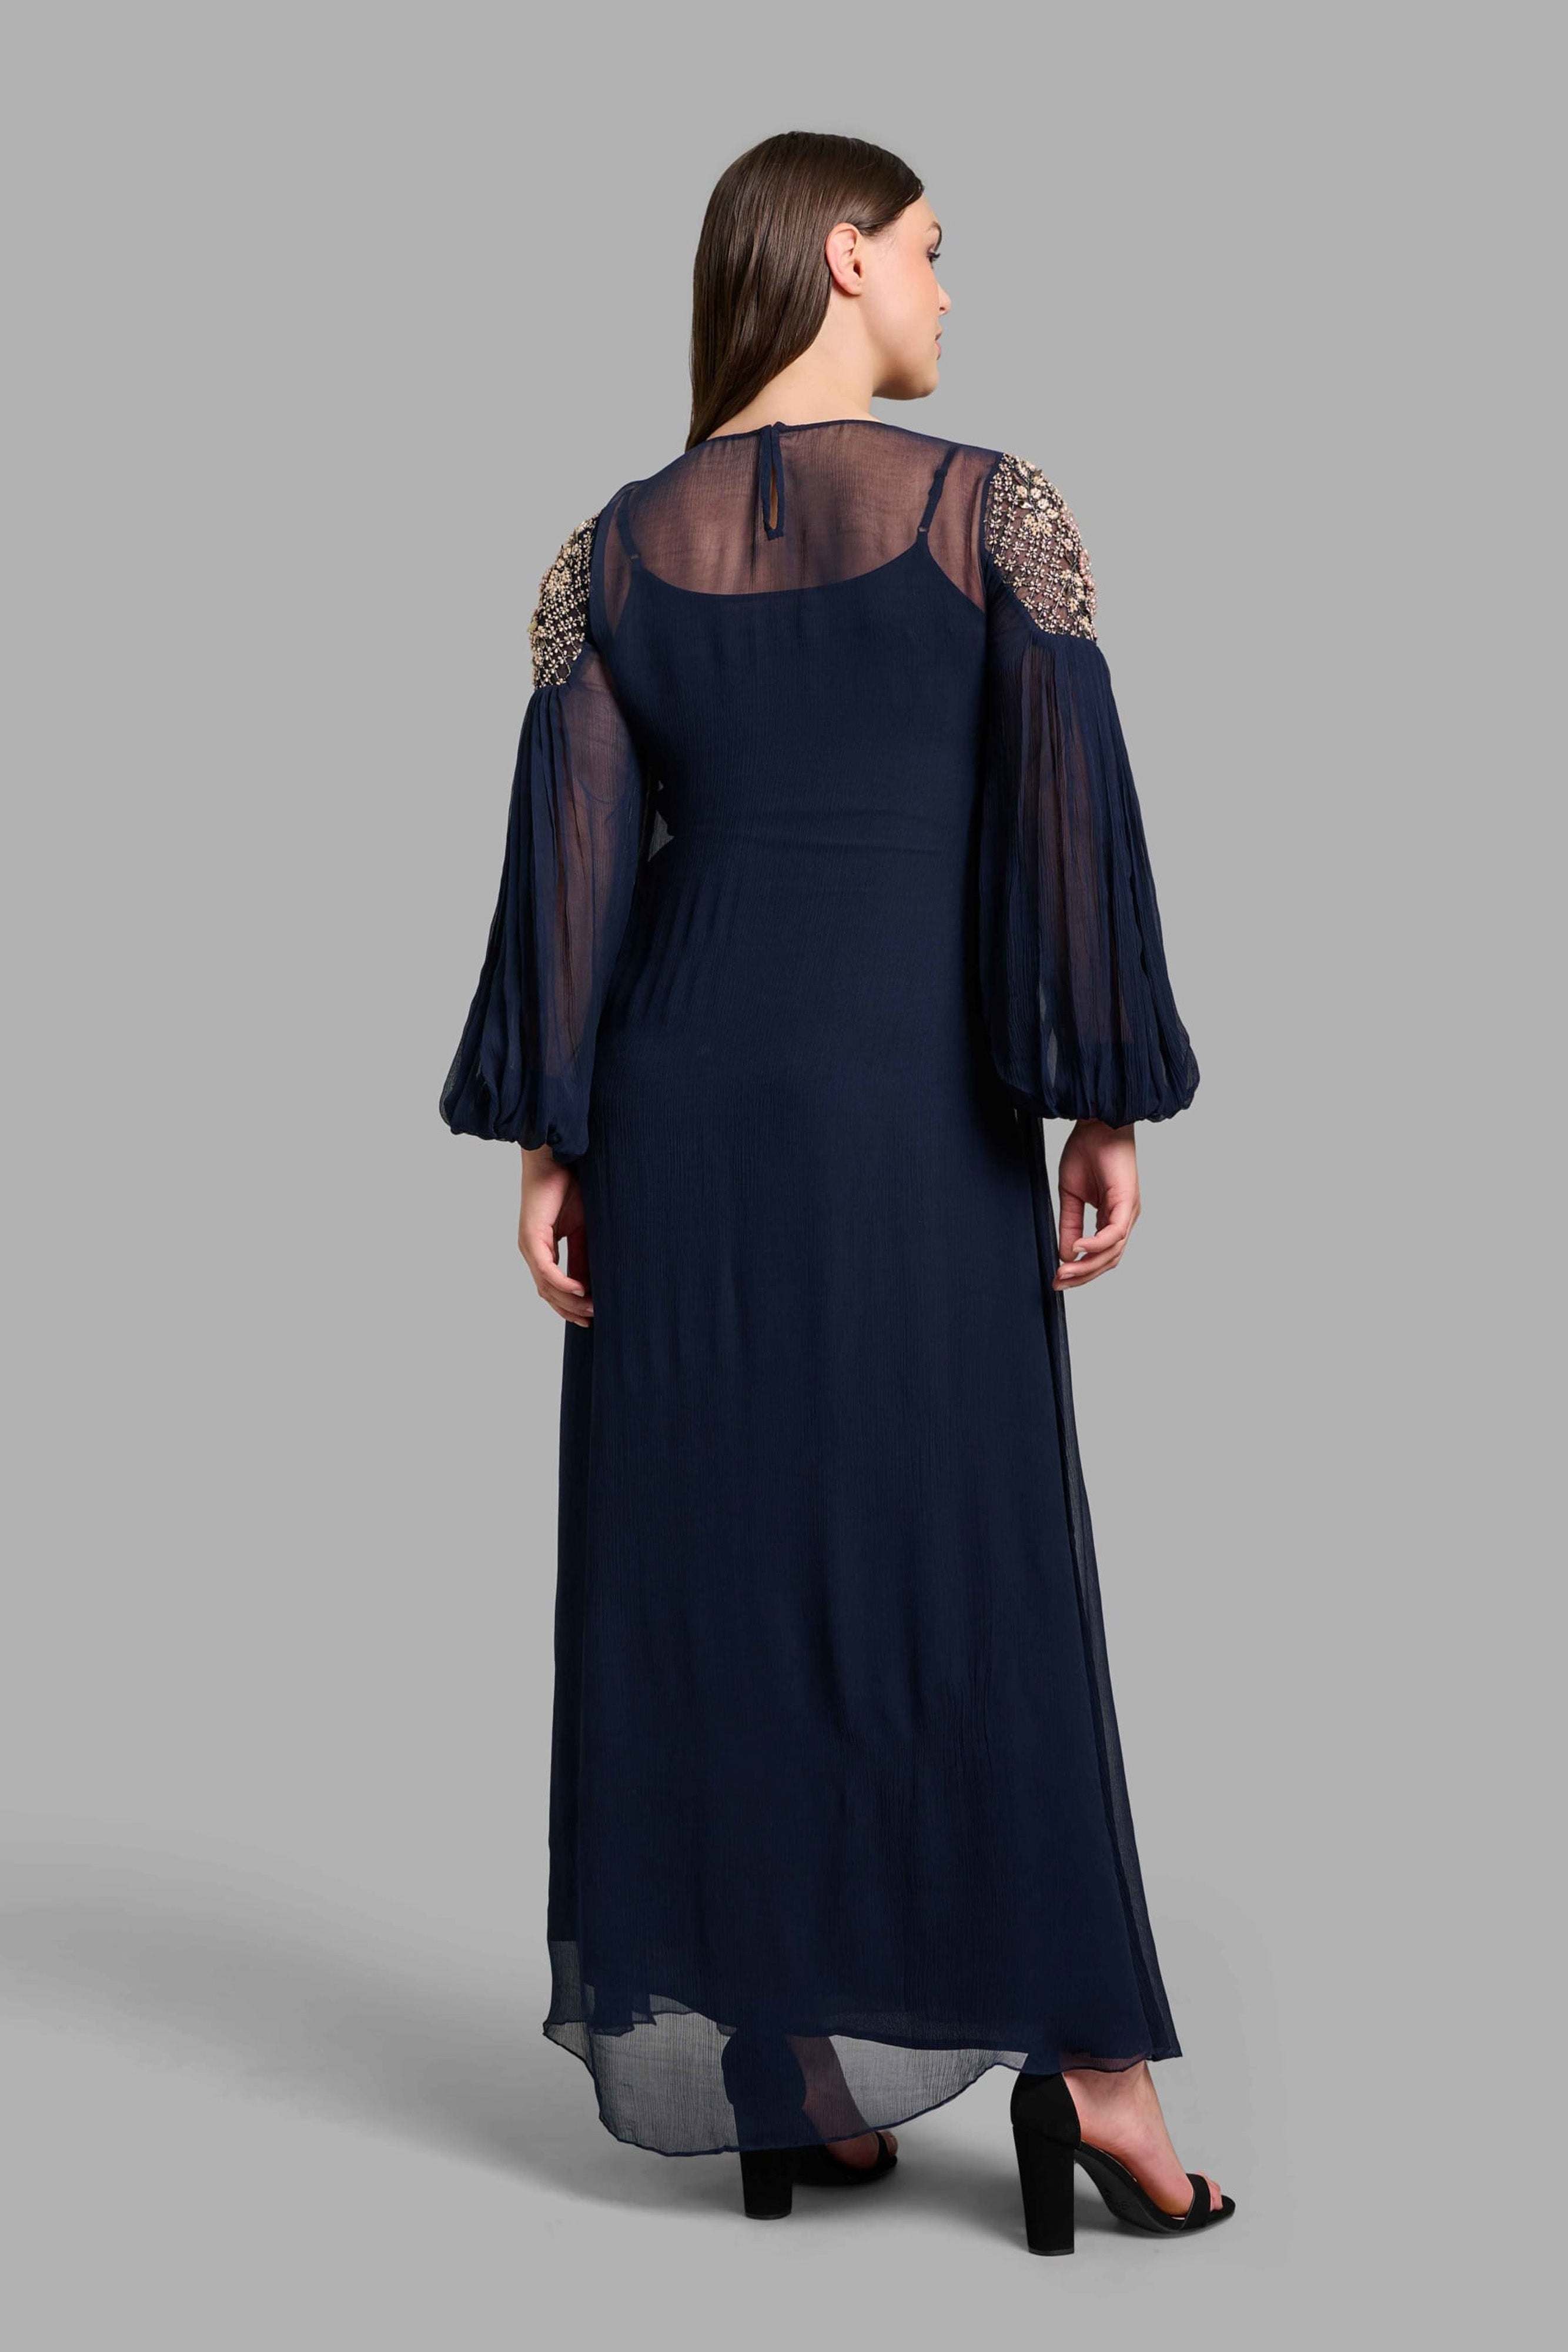 Navy Blue Dress with Puffed Sleeves